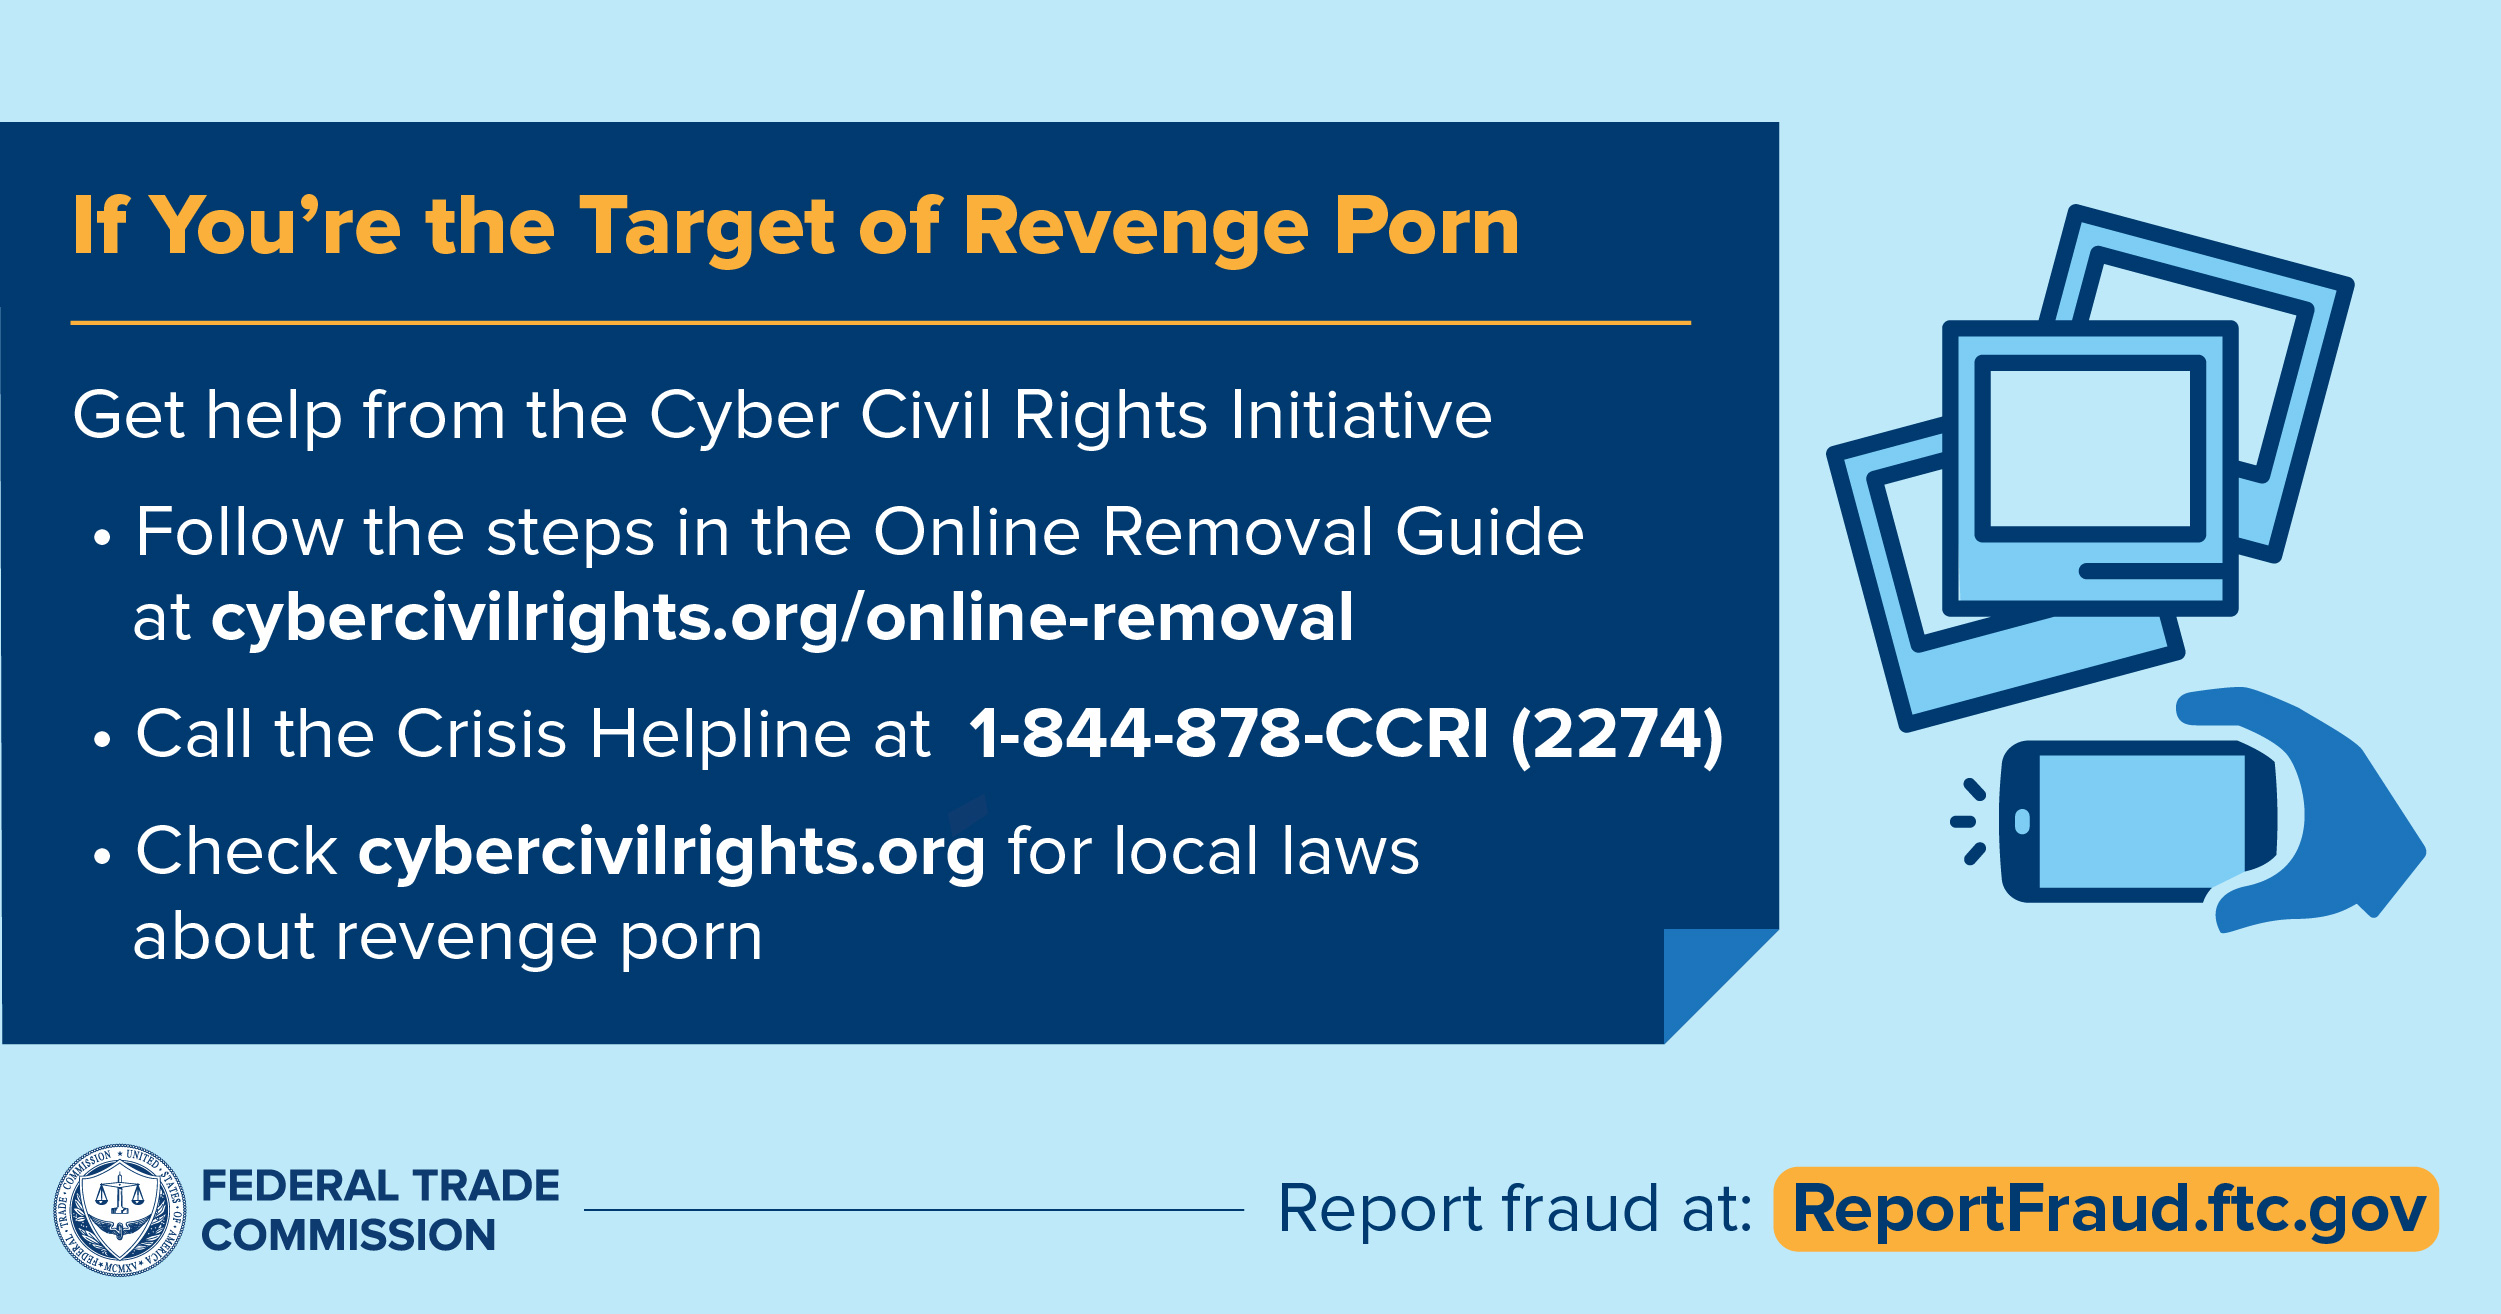 What To Do if You're the Target of Revenge Porn | Consumer Advice